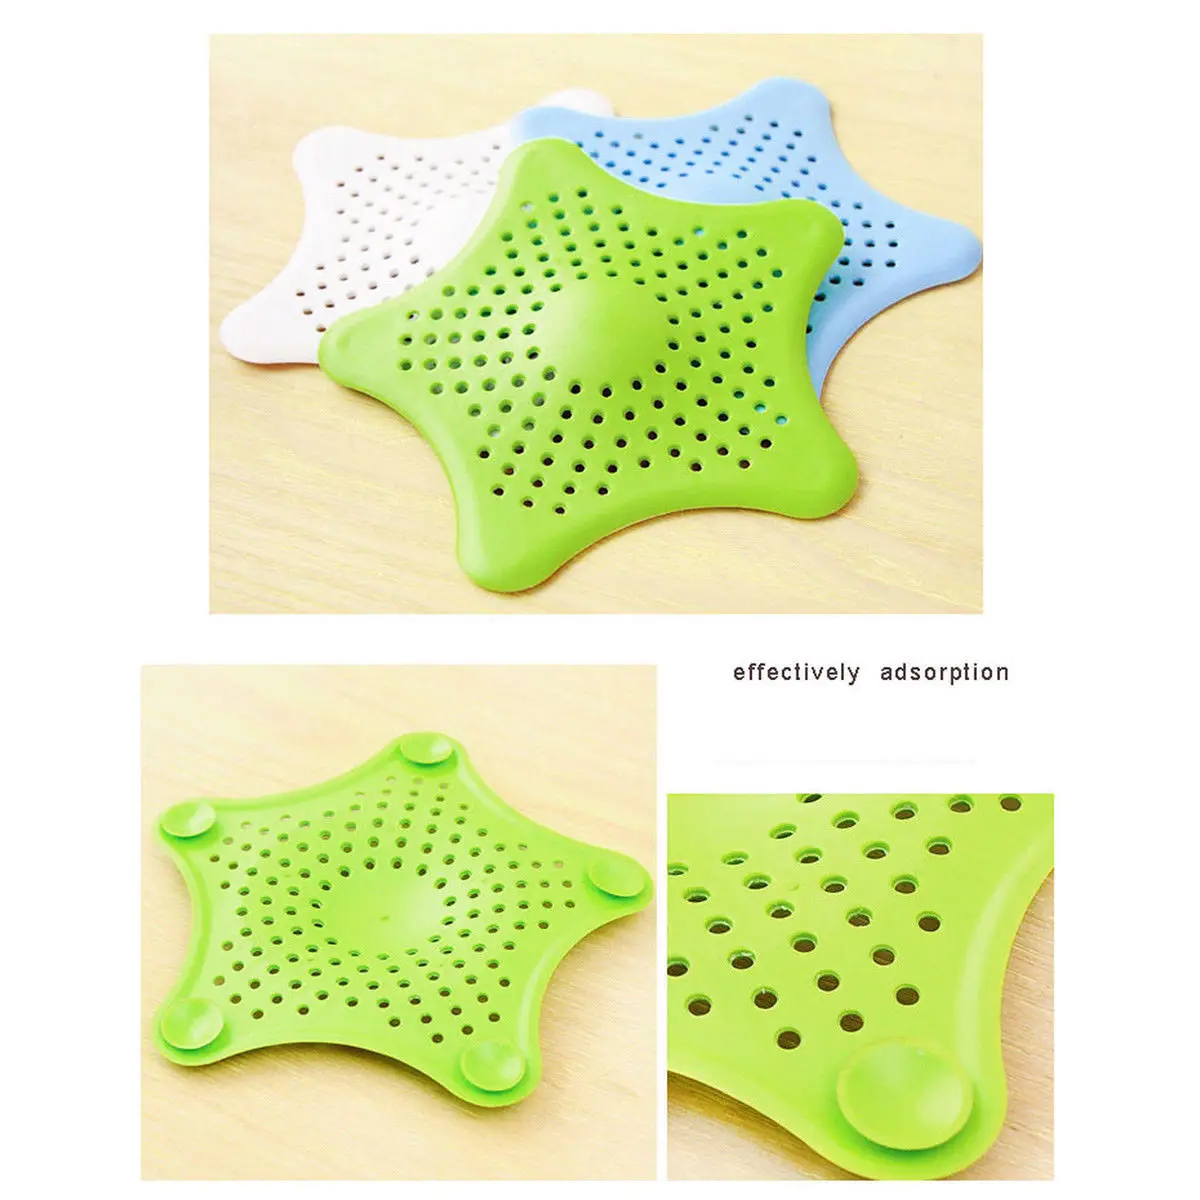 New Star Silicone Waste Sink Strainer Hair Filter Drain Catcher Cover Good Item